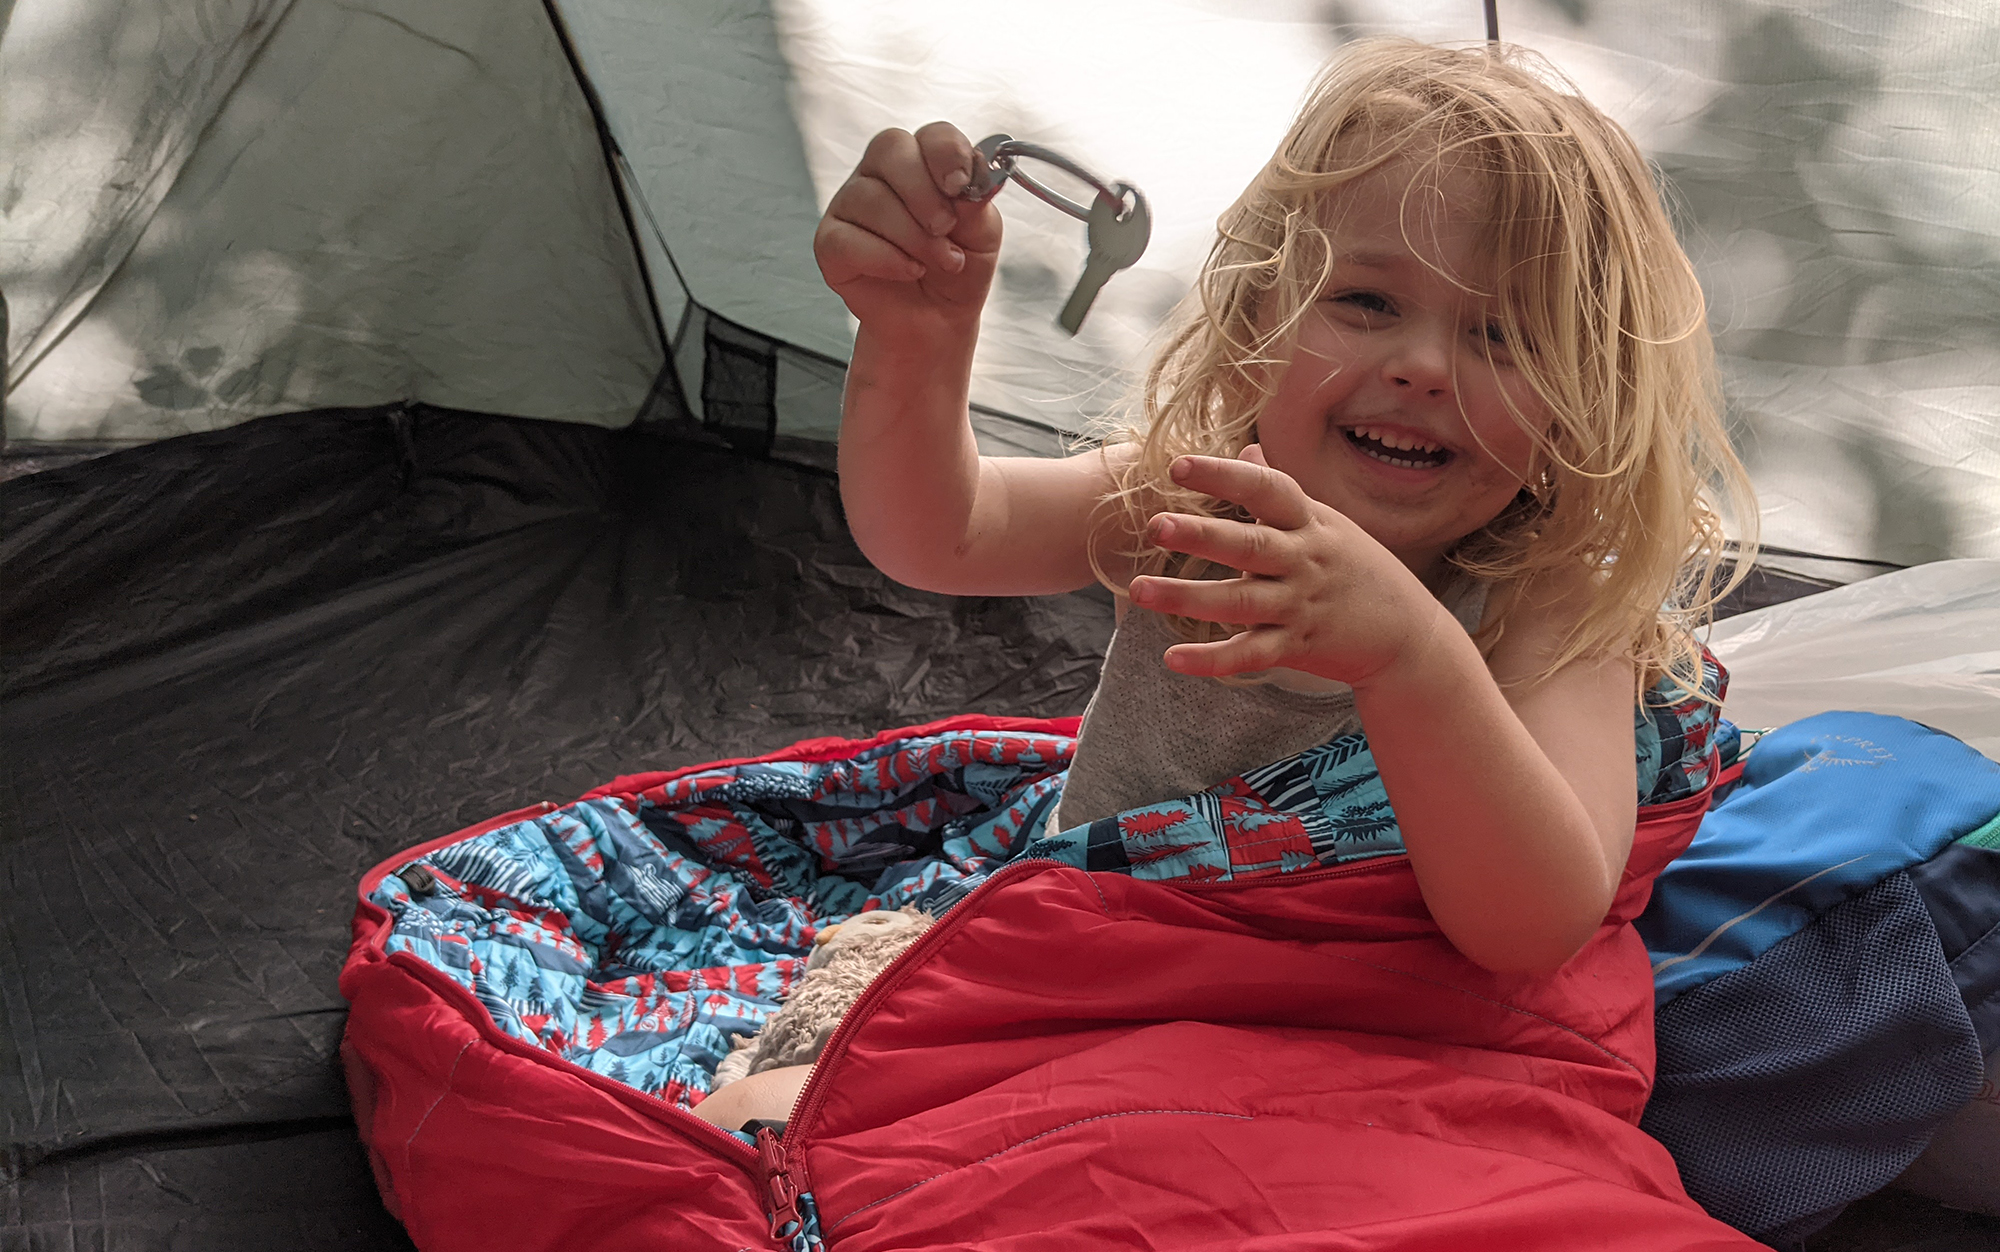 Kids can get pretty dirty, so you’ll probably have to clean their sleeping bag eventually.